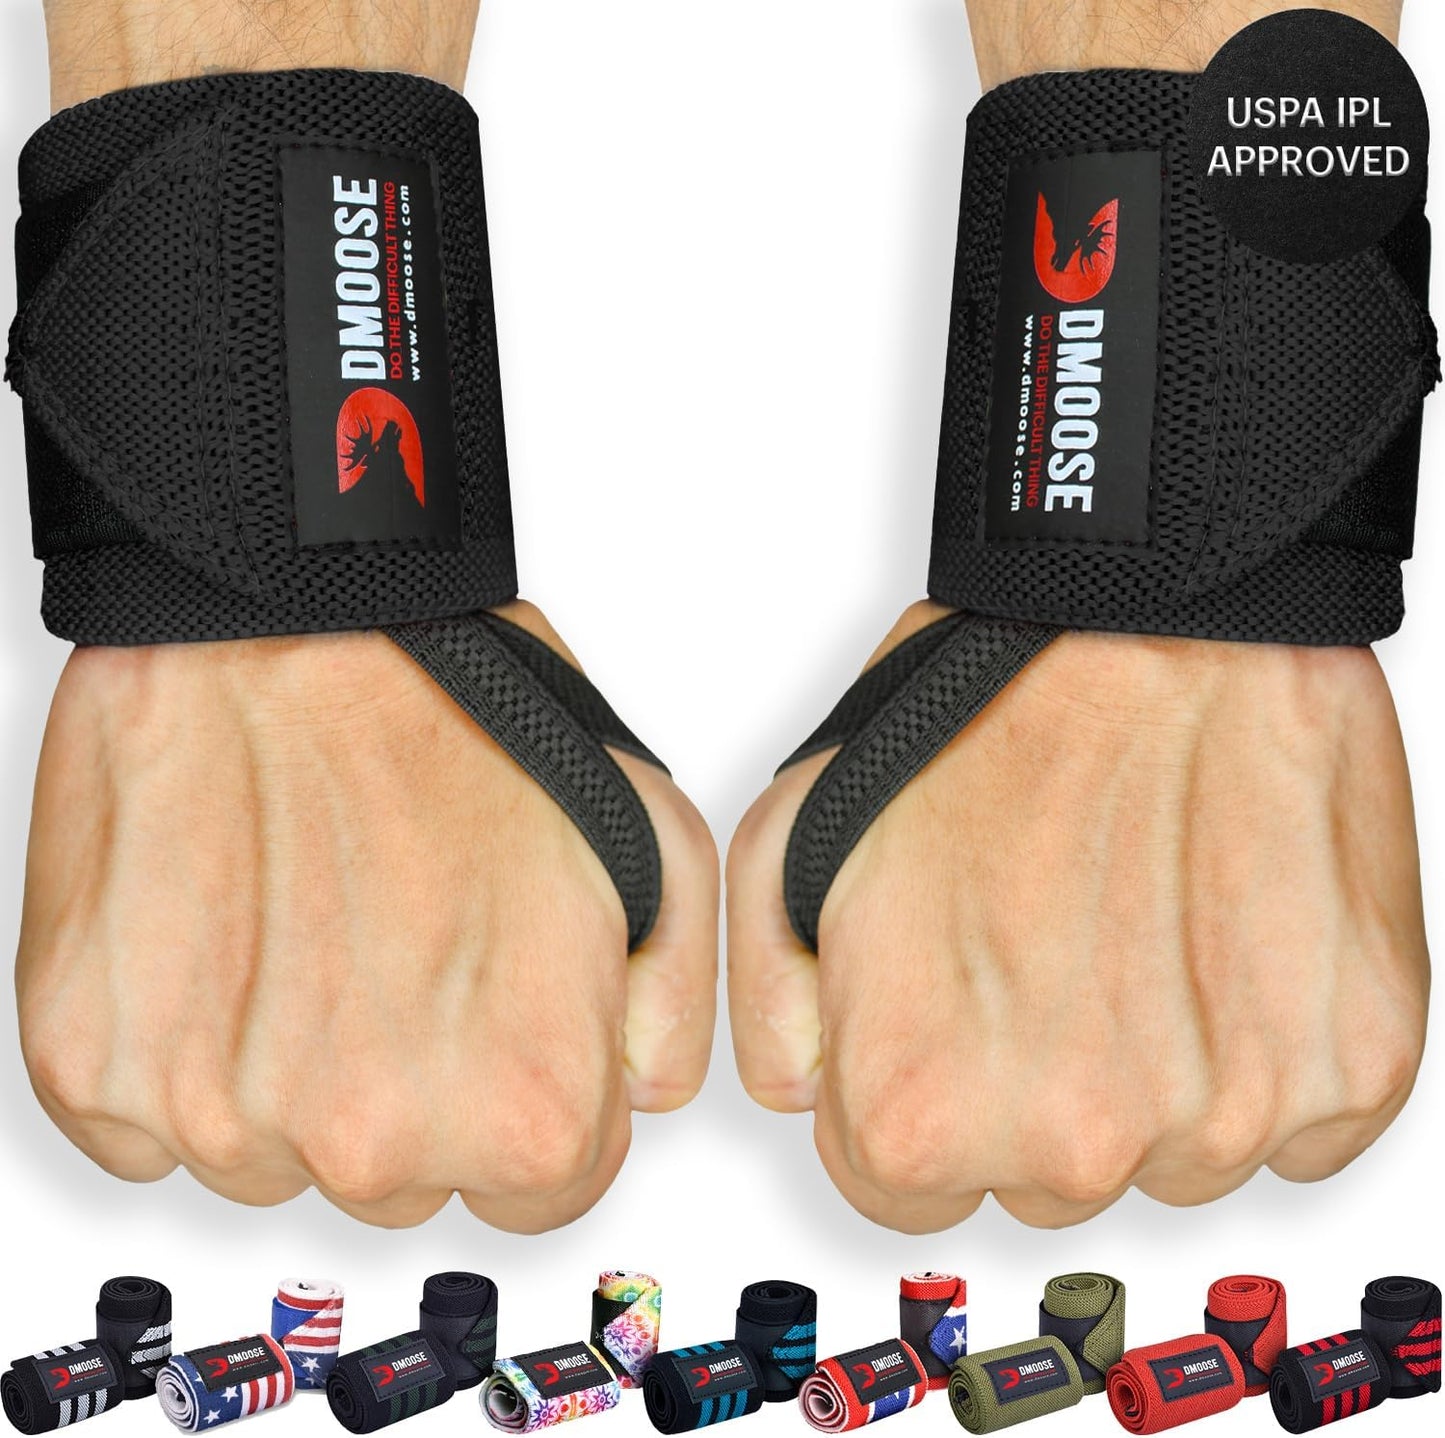 Wrist Wraps (IPL Approved) Avoid Injury & Maximize Grip with Thumb Loop, 18" or 12" Gym Wrist Wraps Pair, Wrist Wraps for Weightlifting Men, Wrist Brace for Working Out & Wrist Support